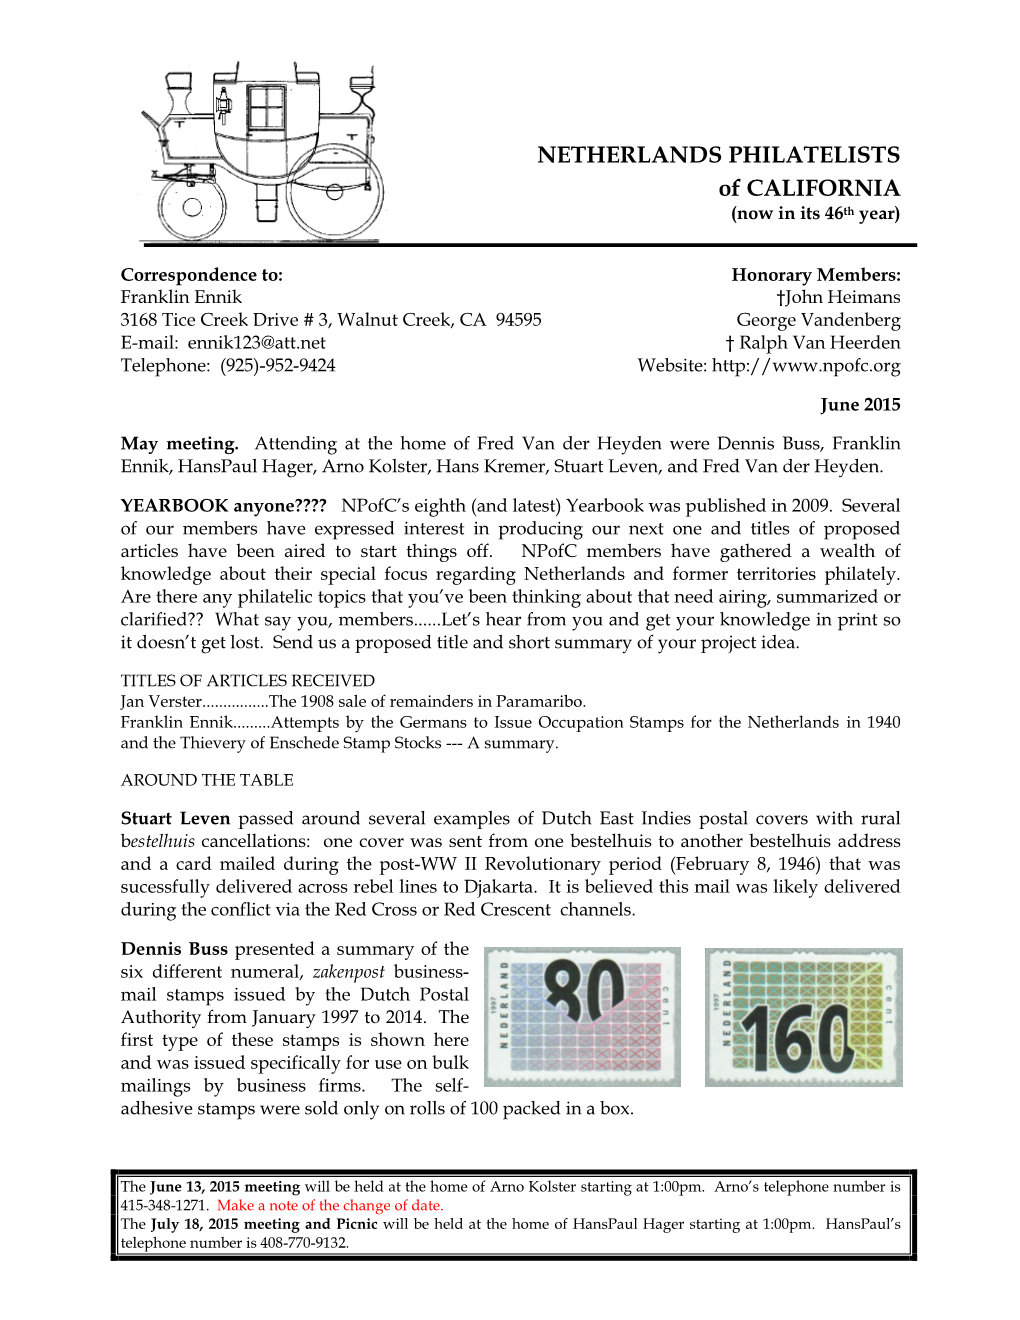 NETHERLANDS PHILATELISTS of CALIFORNIA (Now in Its 46Th Year)